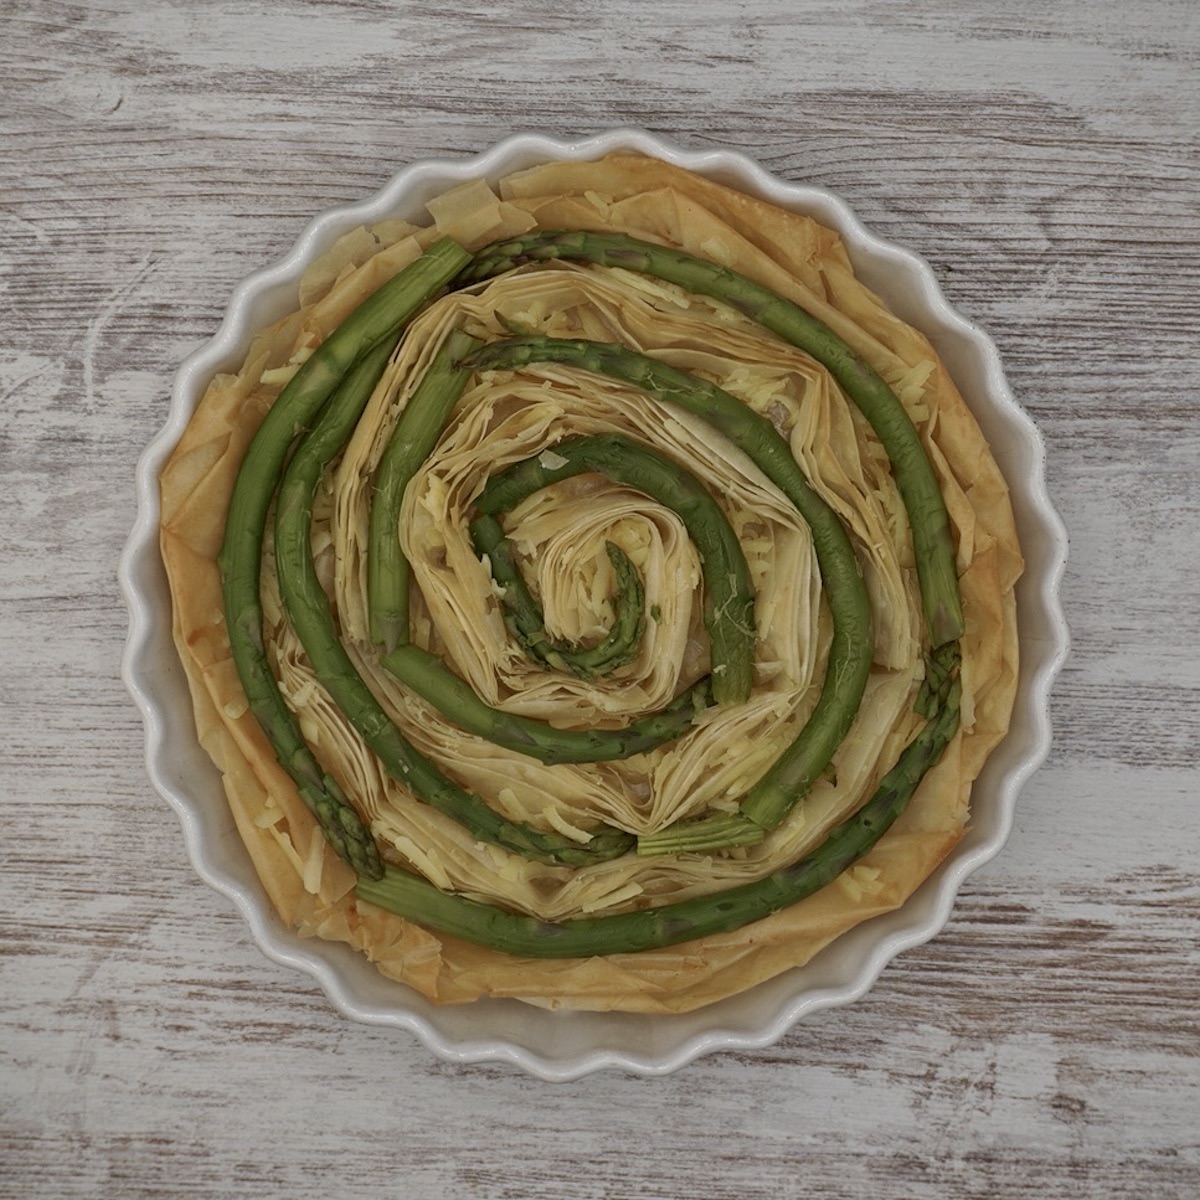 A filo tart case with asparagus formed in a spiral.